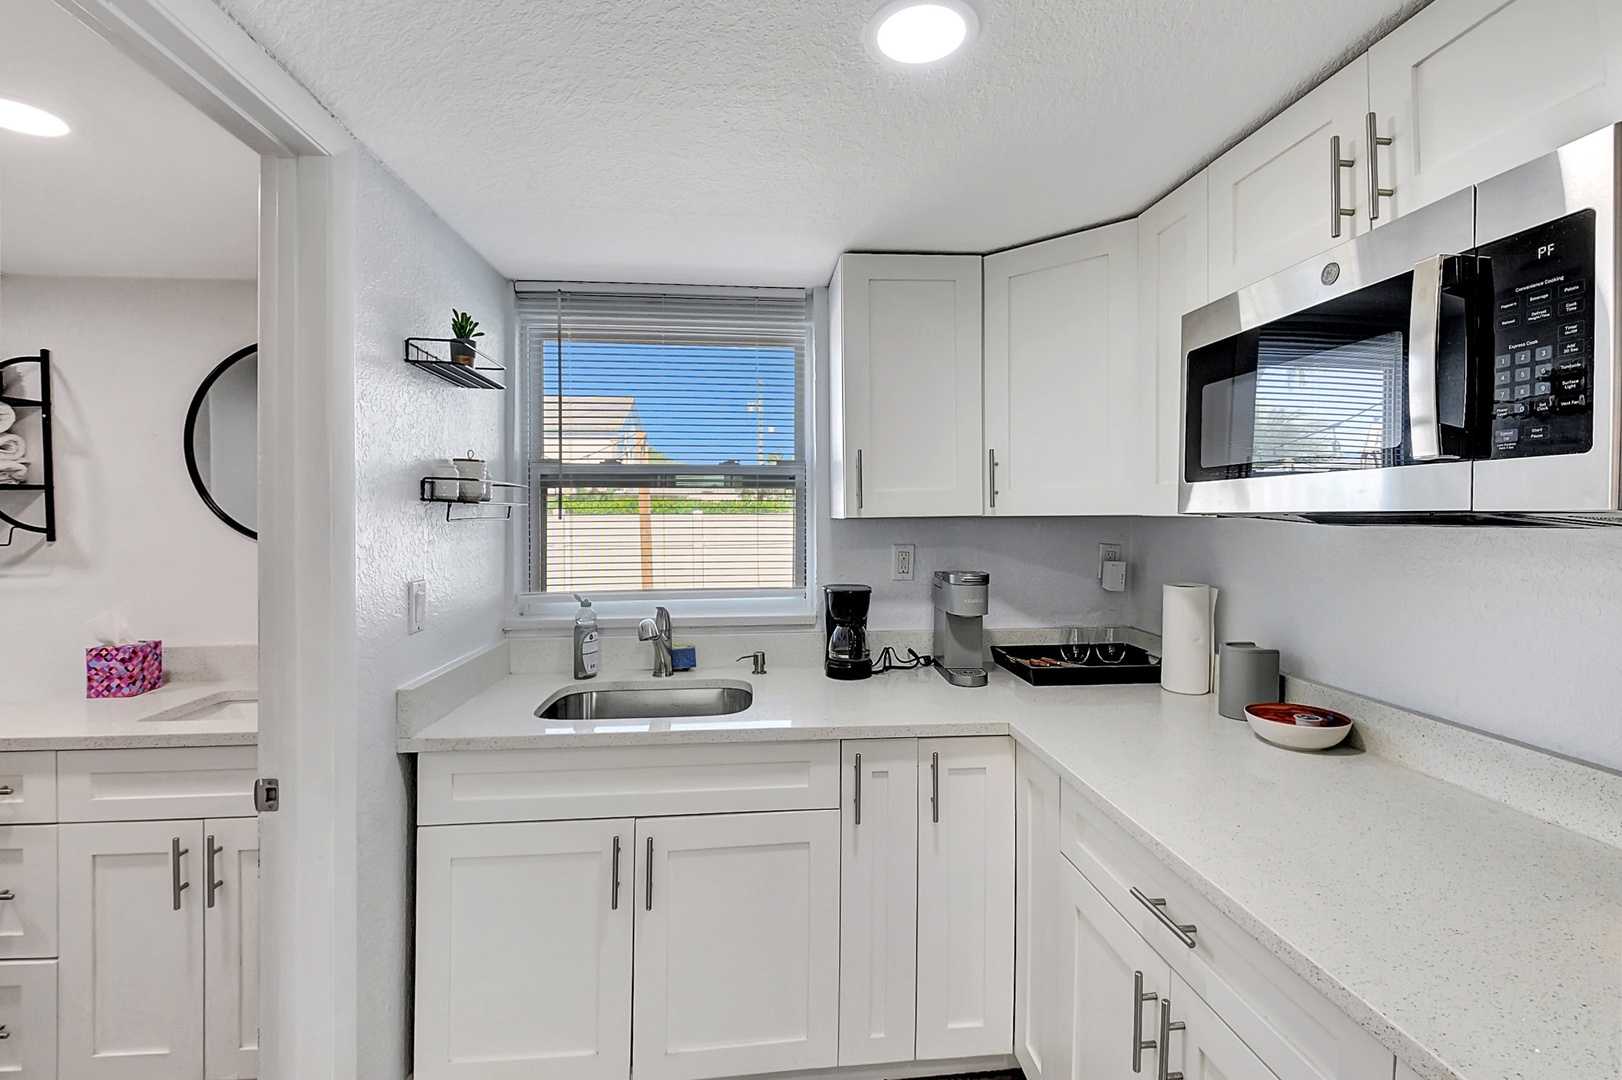 The streamlined kitchen is well-equipped for your visit